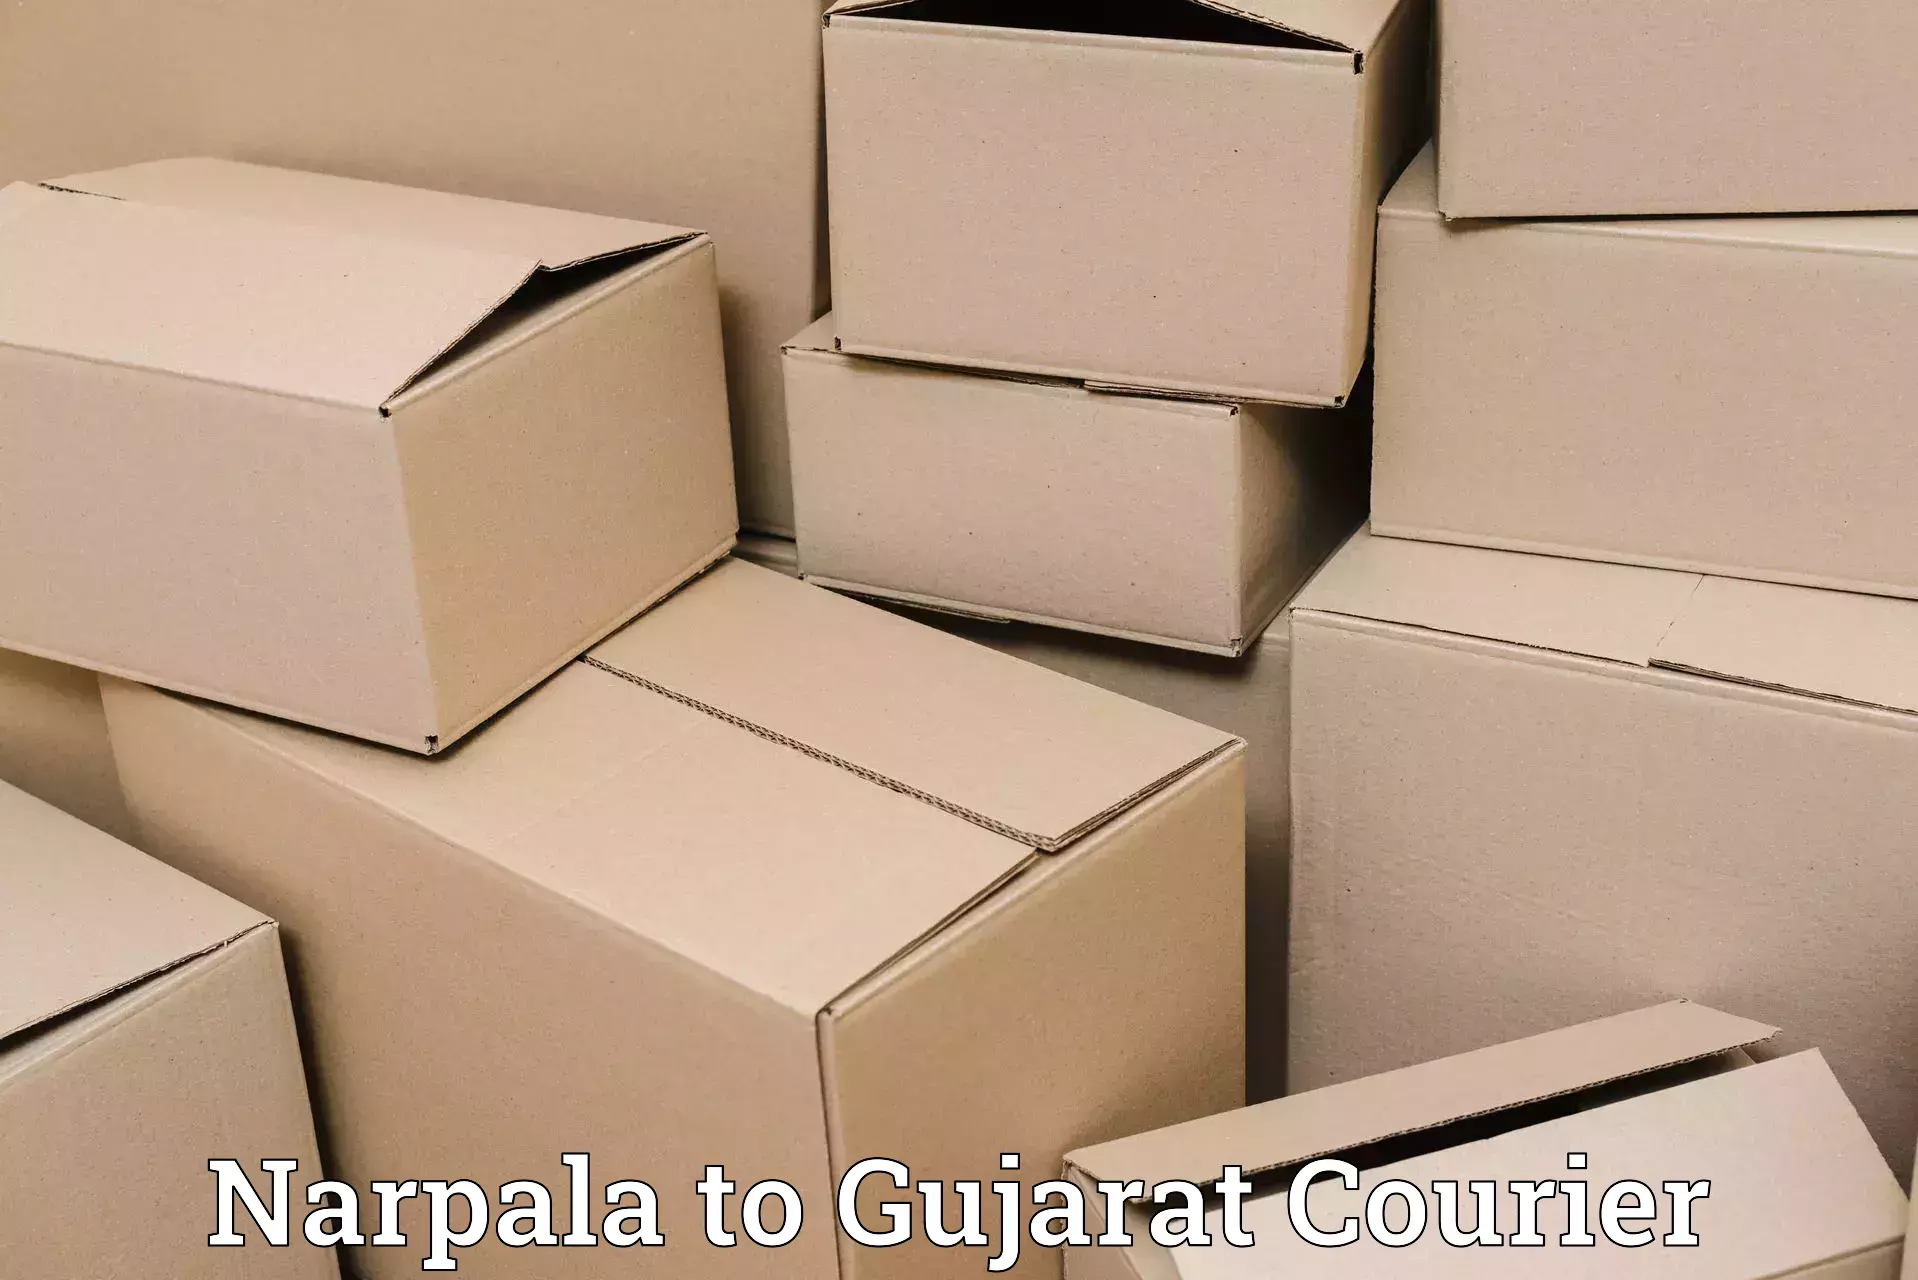 Seamless shipping experience Narpala to Anand